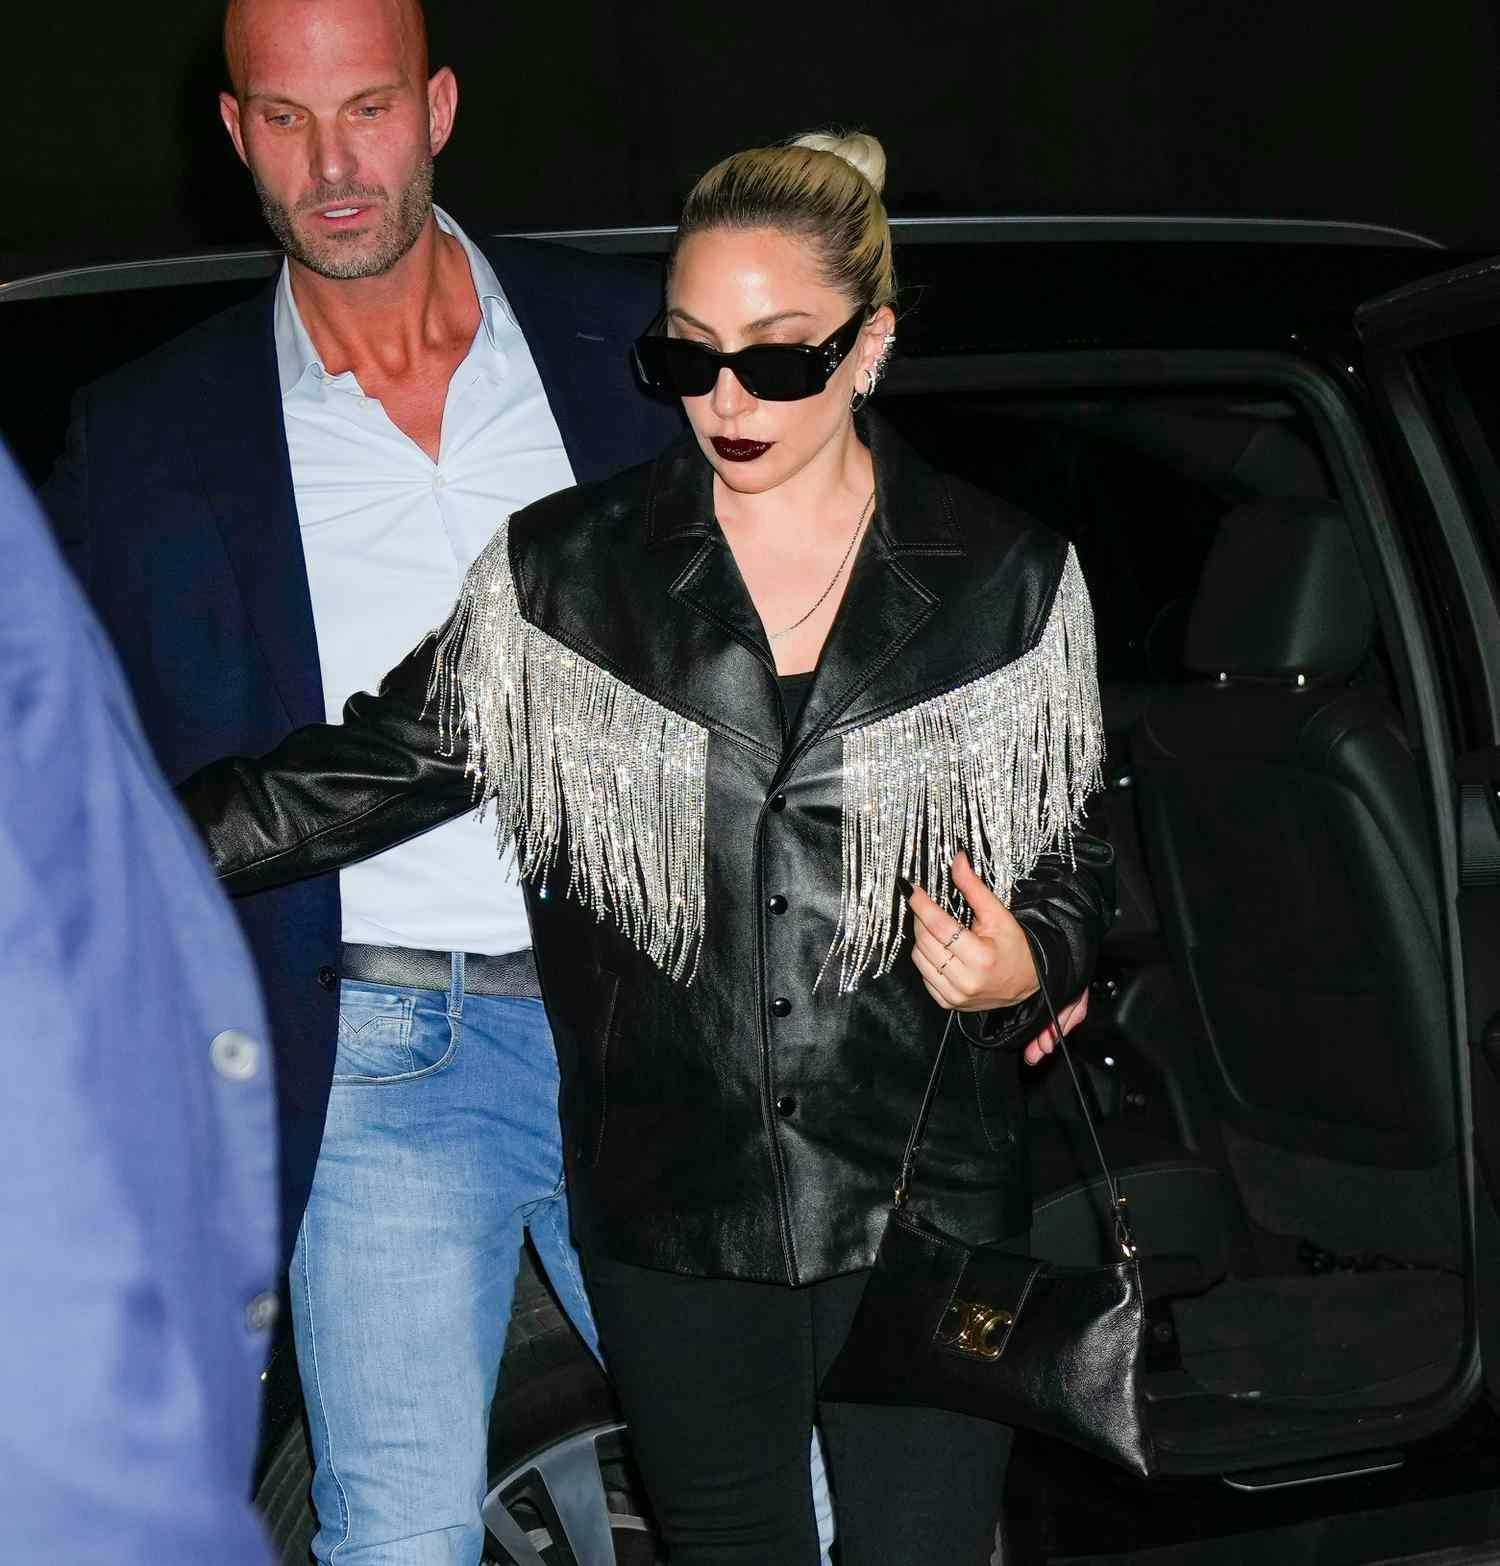 lady gaga at snl afterparty in fringe cowgirl jacket